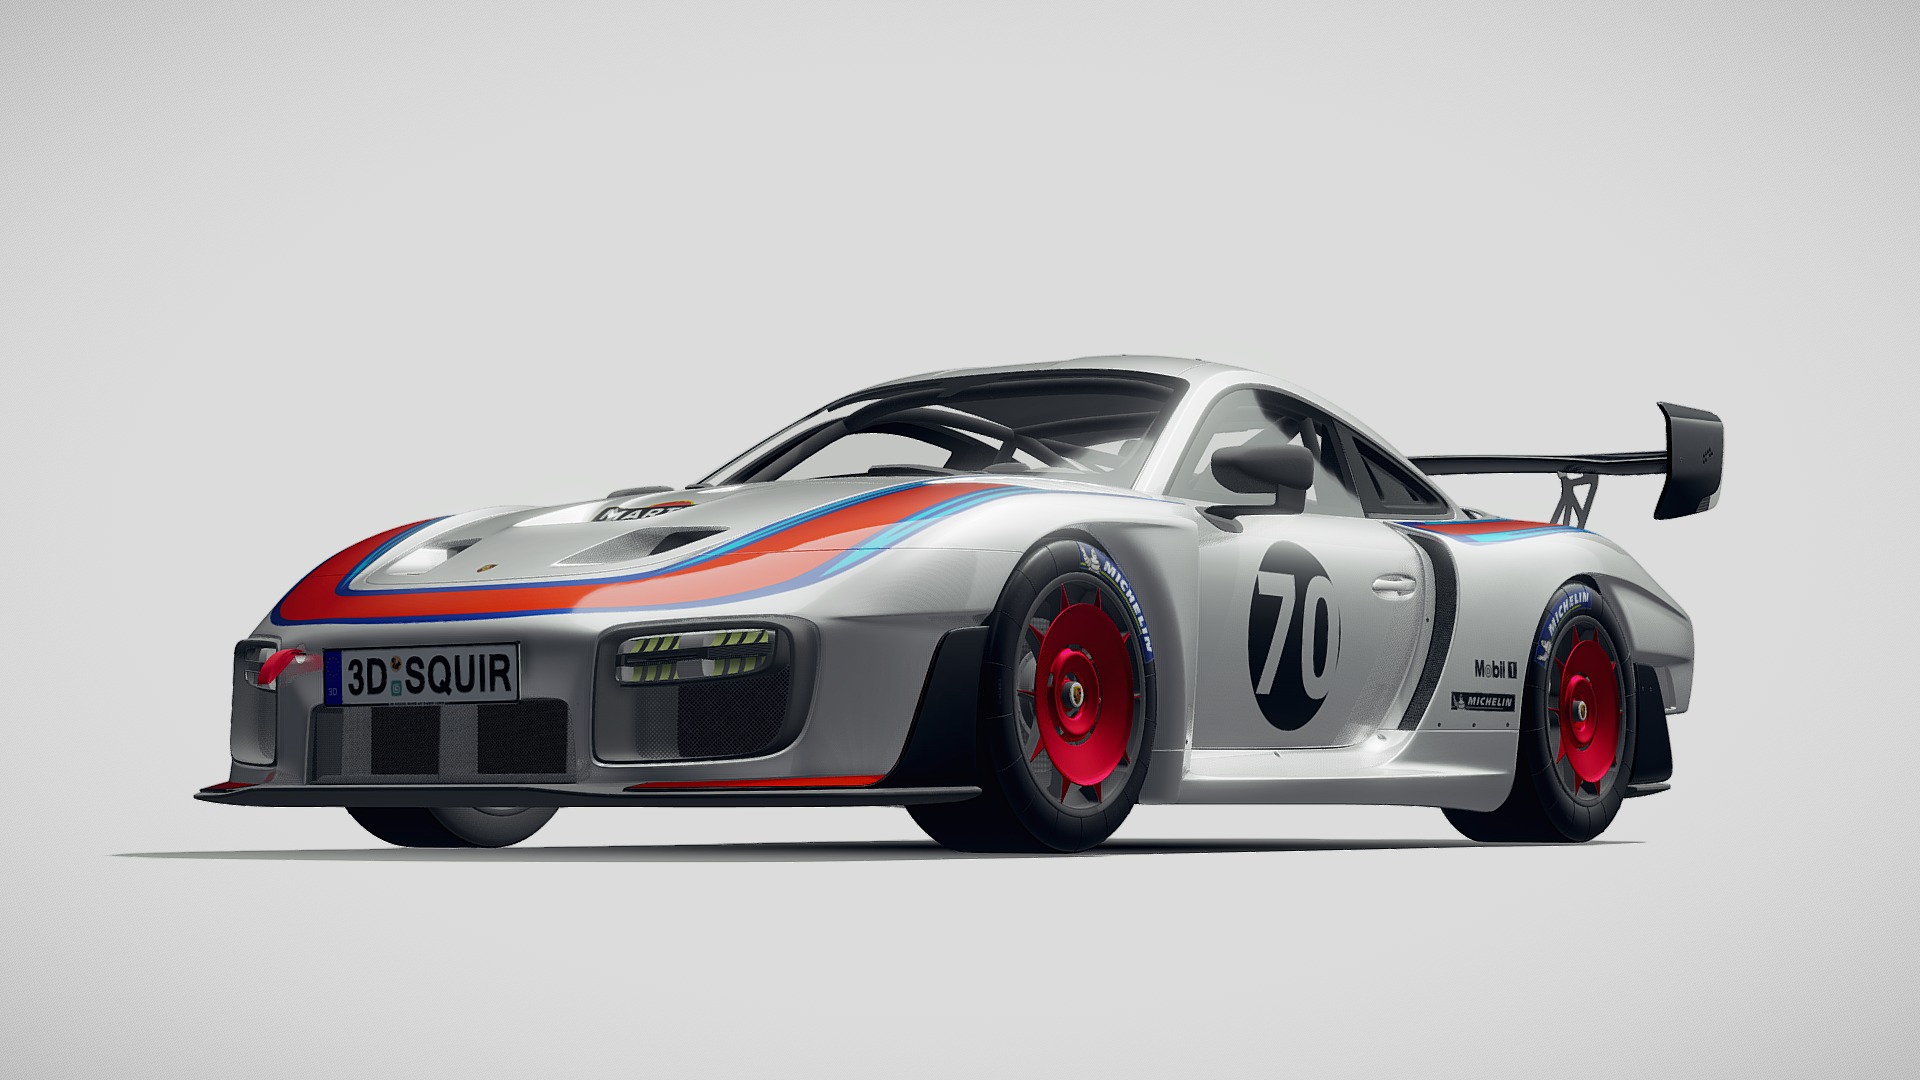 3D model Porsche 935 2019 MobyDick - This is a 3D model of the Porsche 935 2019 MobyDick. The 3D model is about a white and red sports car.